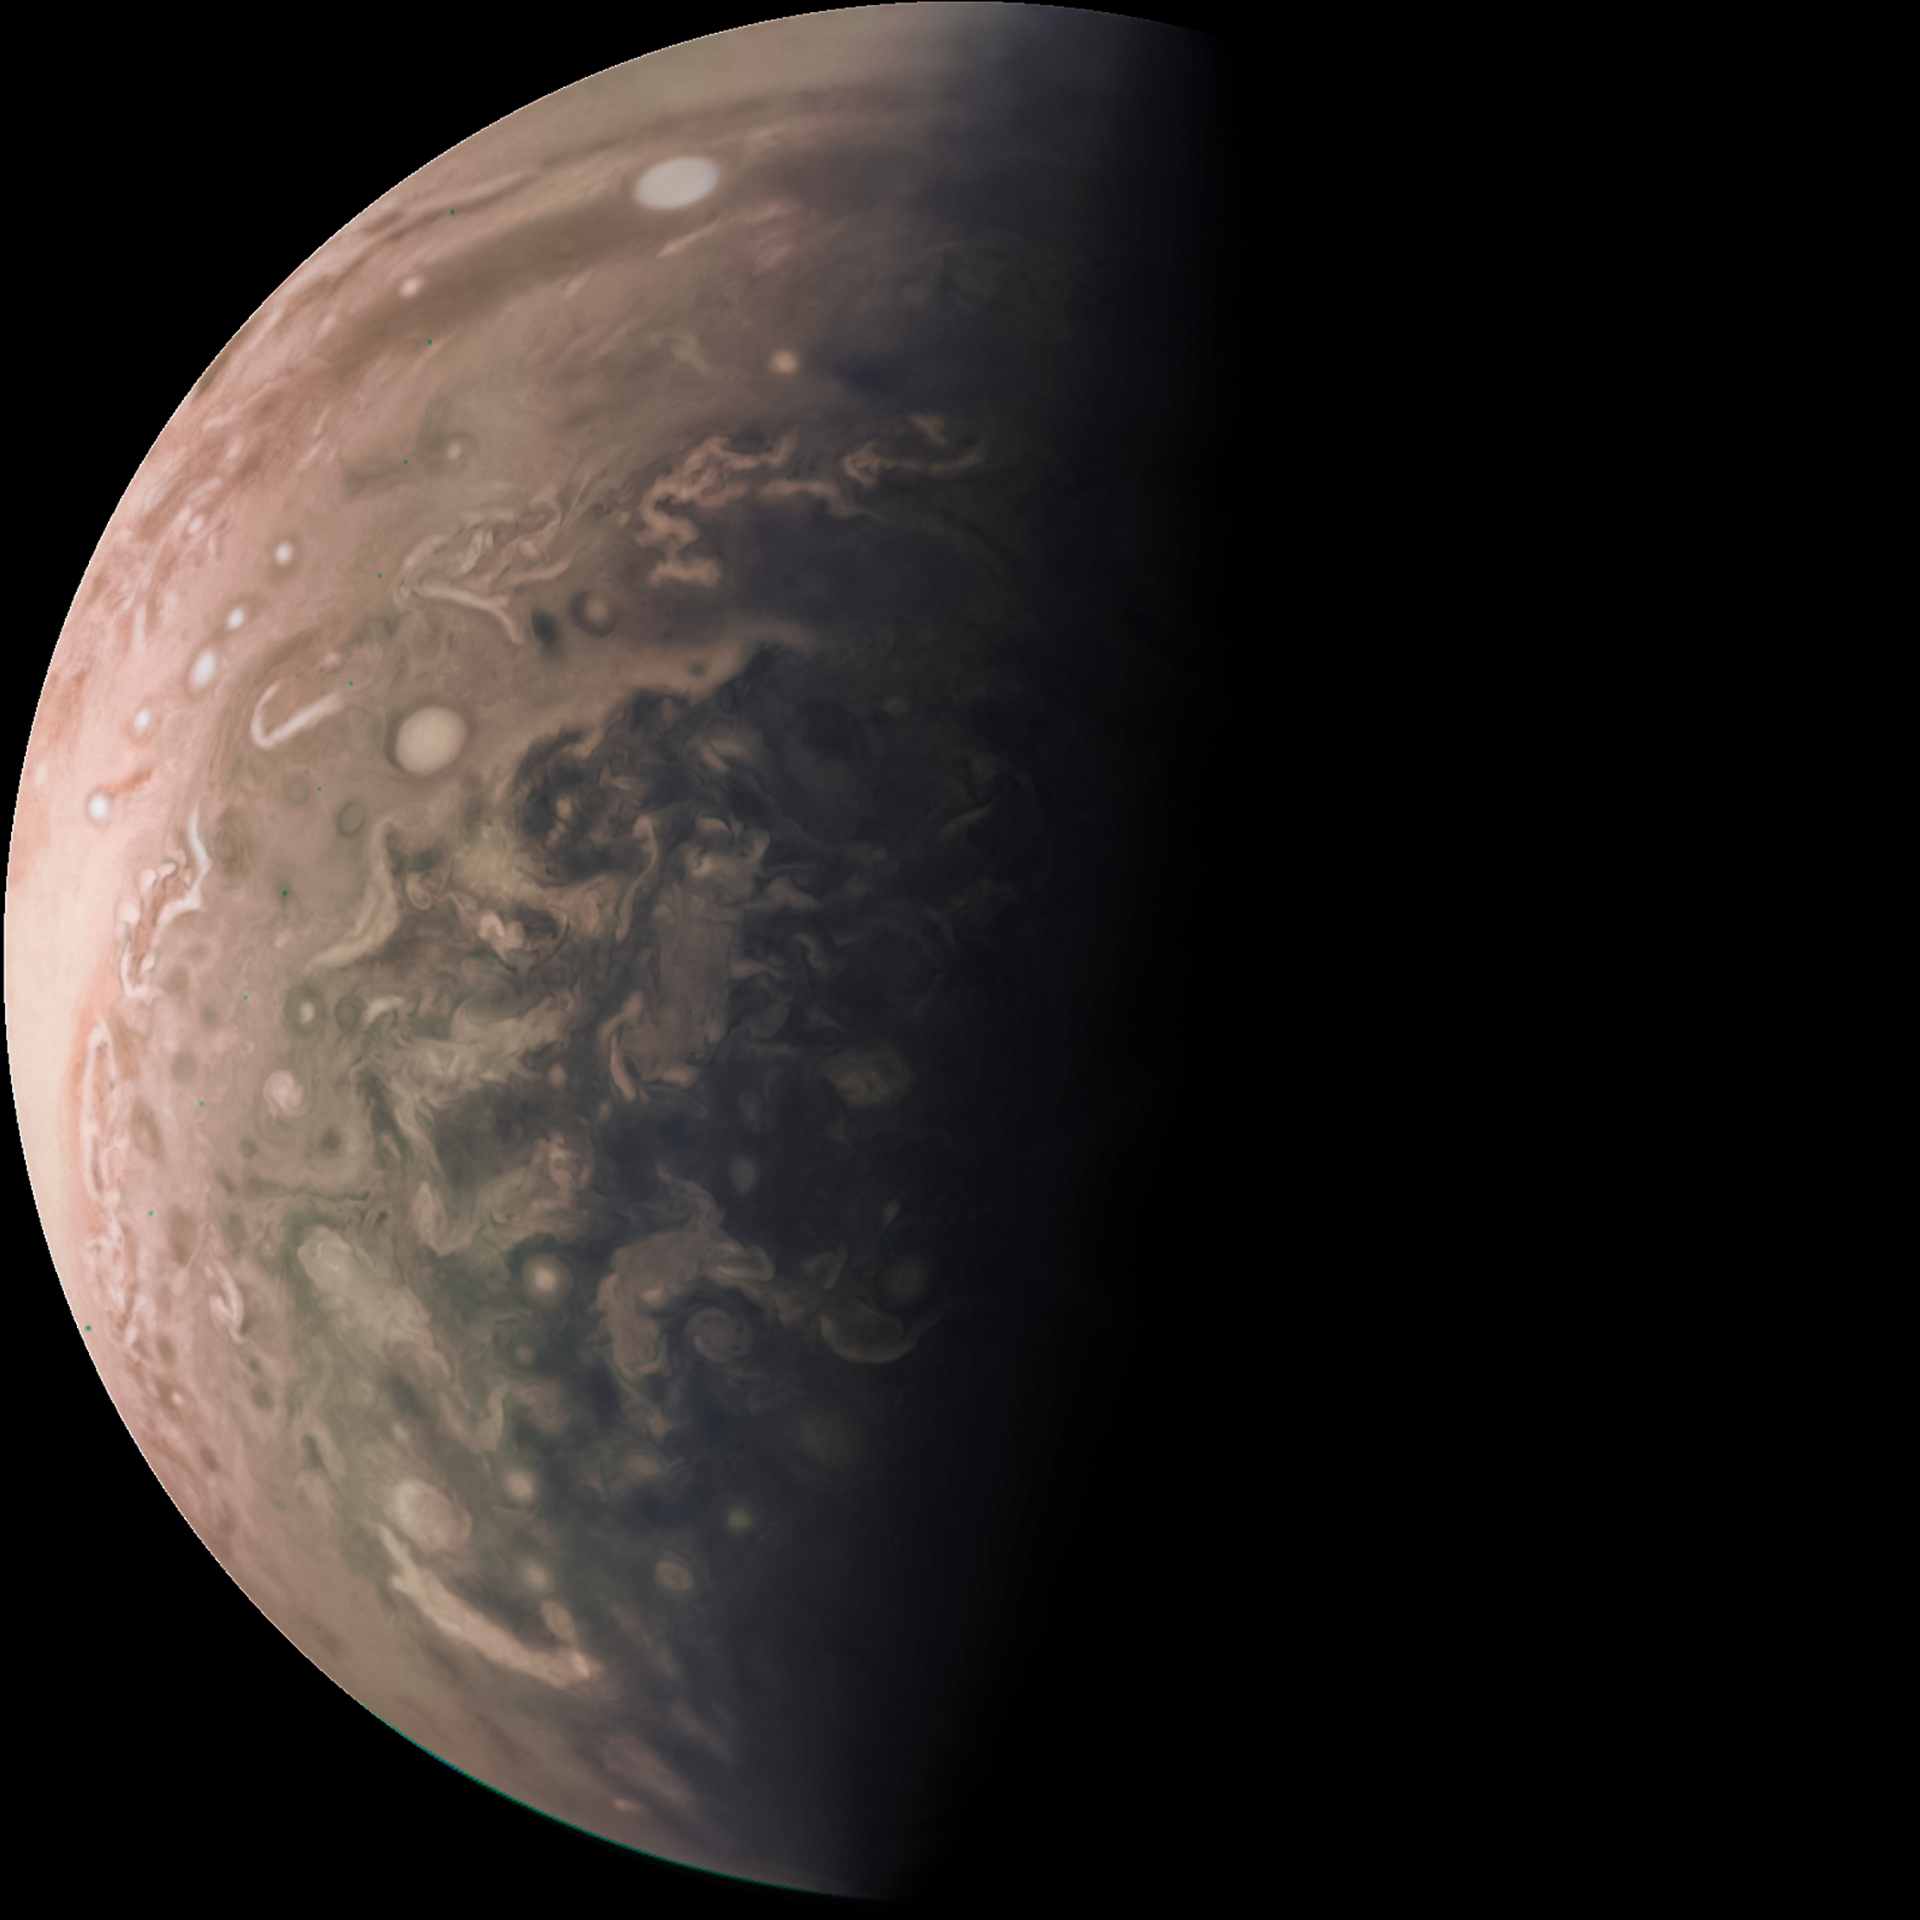 NASA’s Juno Mission Has Inspired Some Jaw-Dropping Artwork